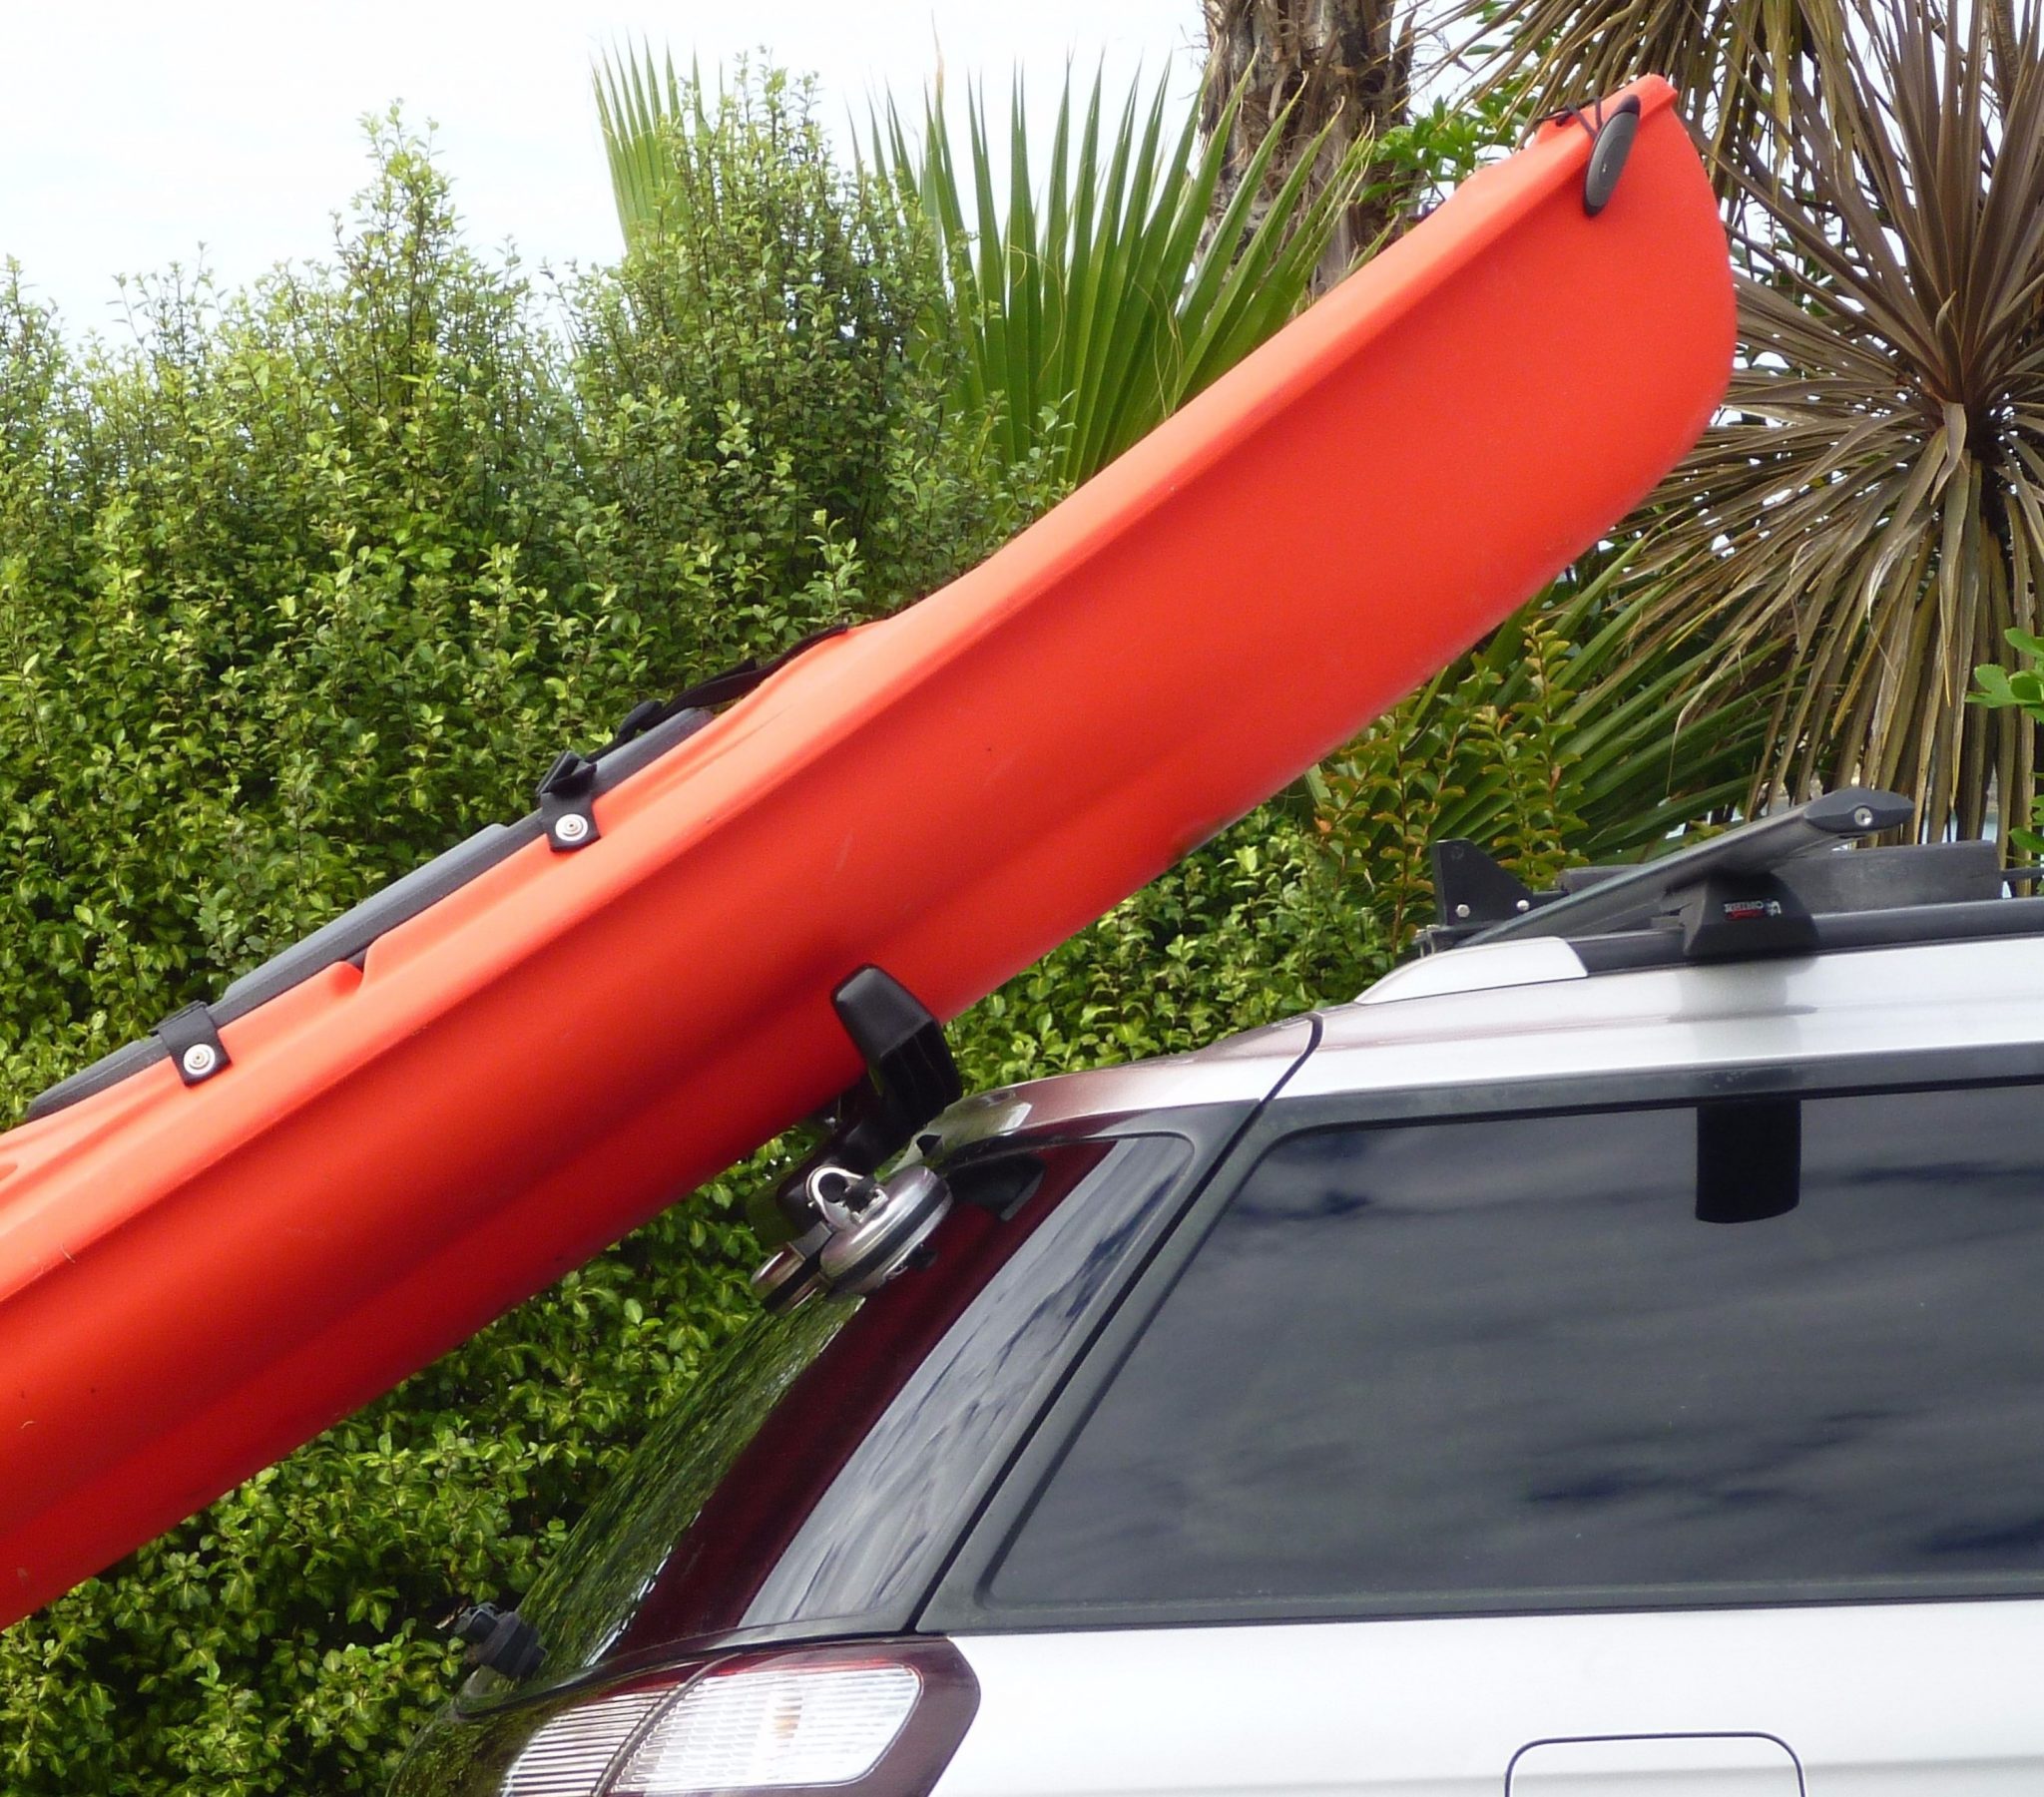 Have You Heard Of Malone Auto Racks? They Have Bikes, Canoes, Cargo & Kayaks All Covered